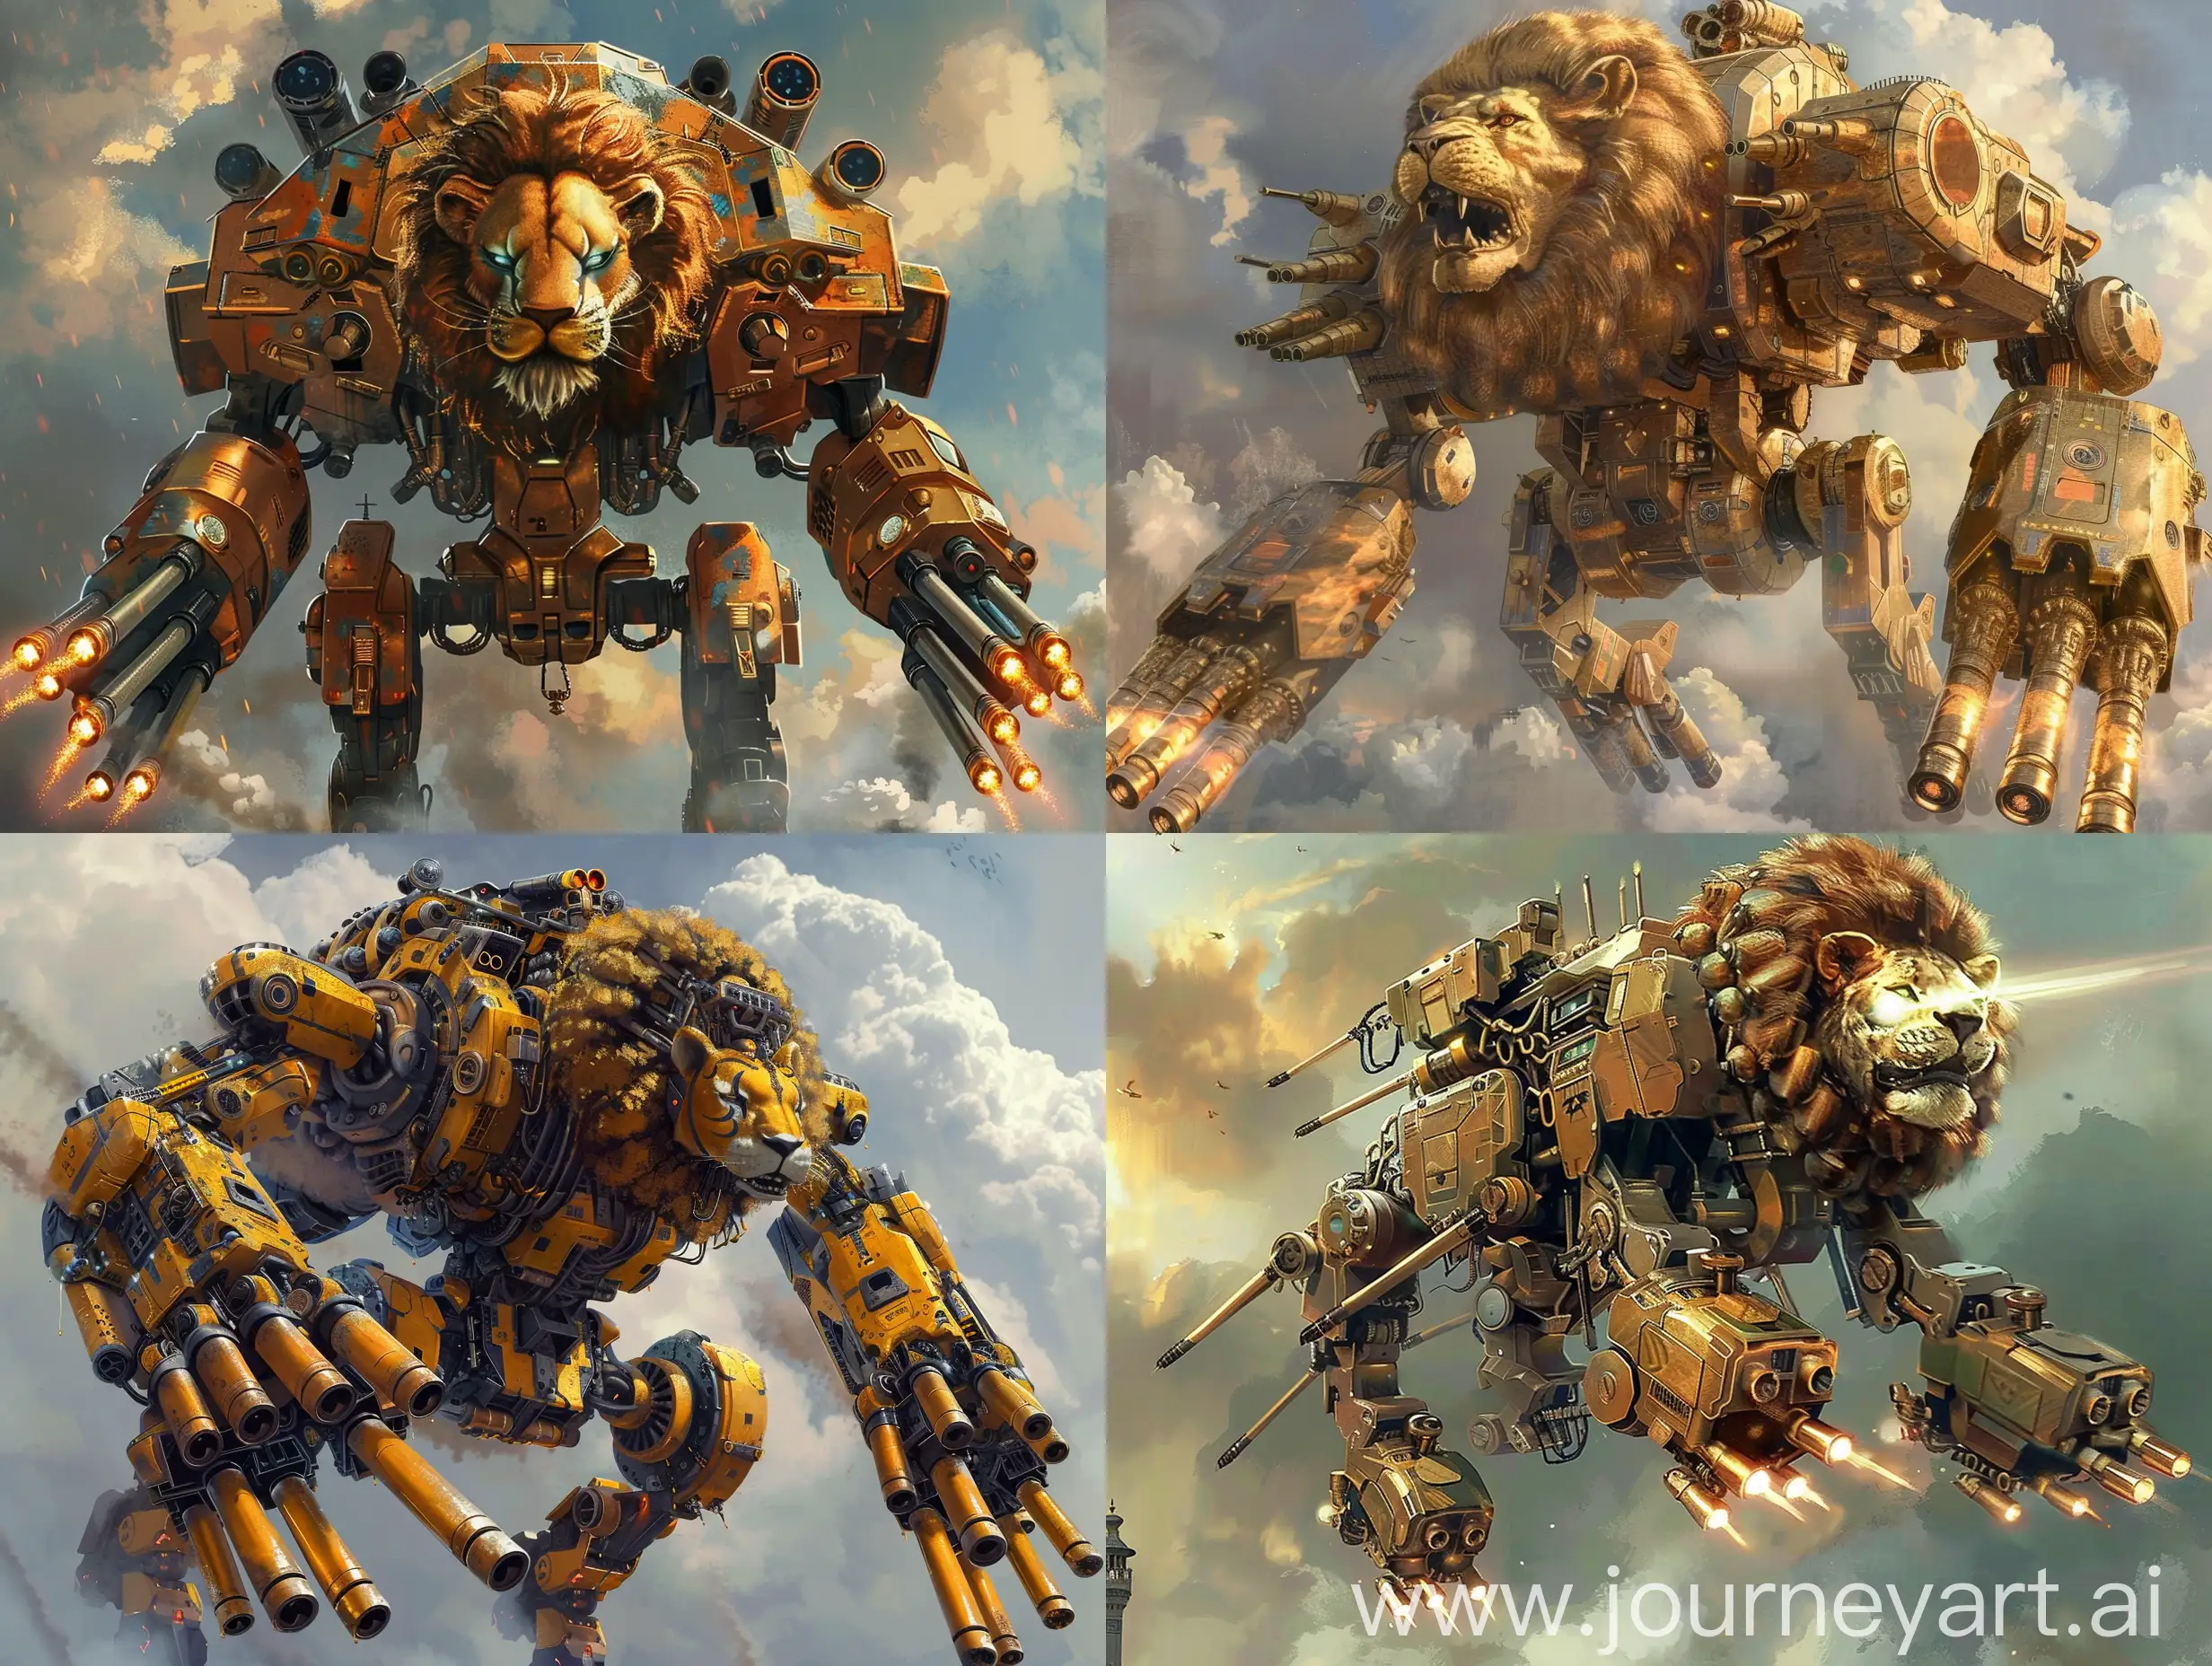 Sci-Fi Iranian Persian Giant War Robot, Mech, Lion Head, Golden Lion Mech, Cannons For Hands, Very Powerful, Flying In The Sky, Scary, Horror